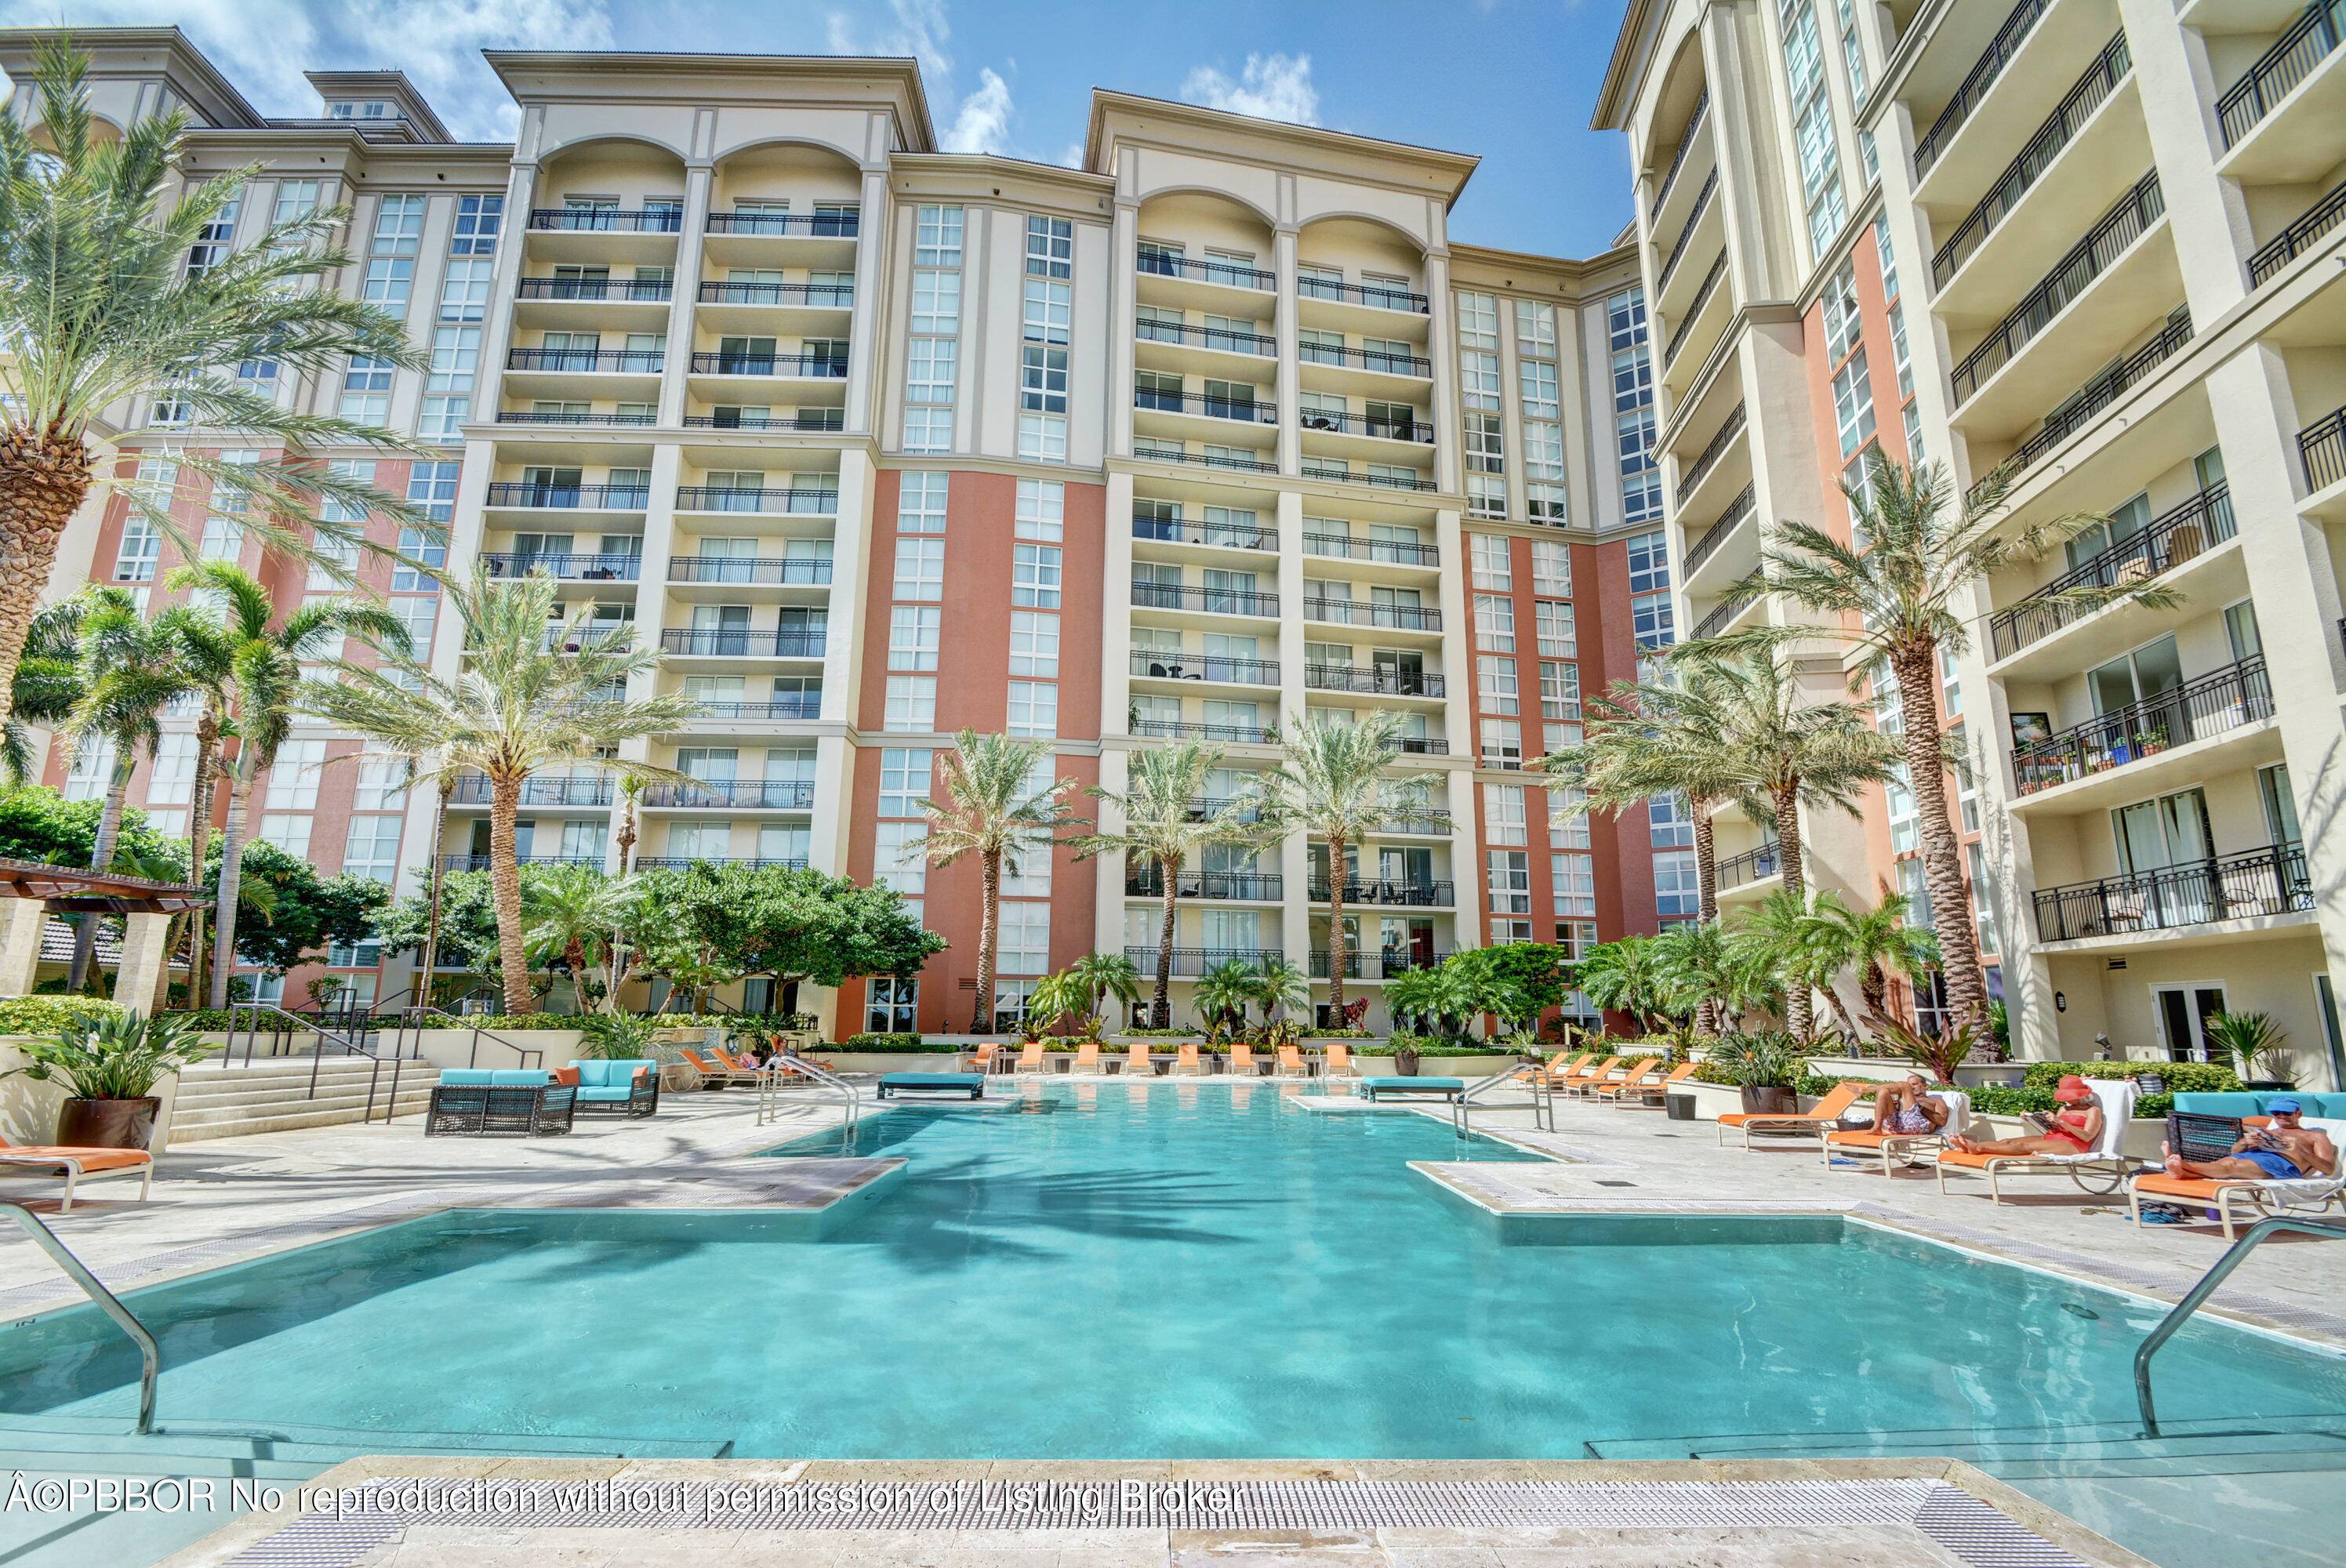 Cityplace South Tower is a full service luxury building in the center of WPB Full time concierge, valet parking, resort style pool.